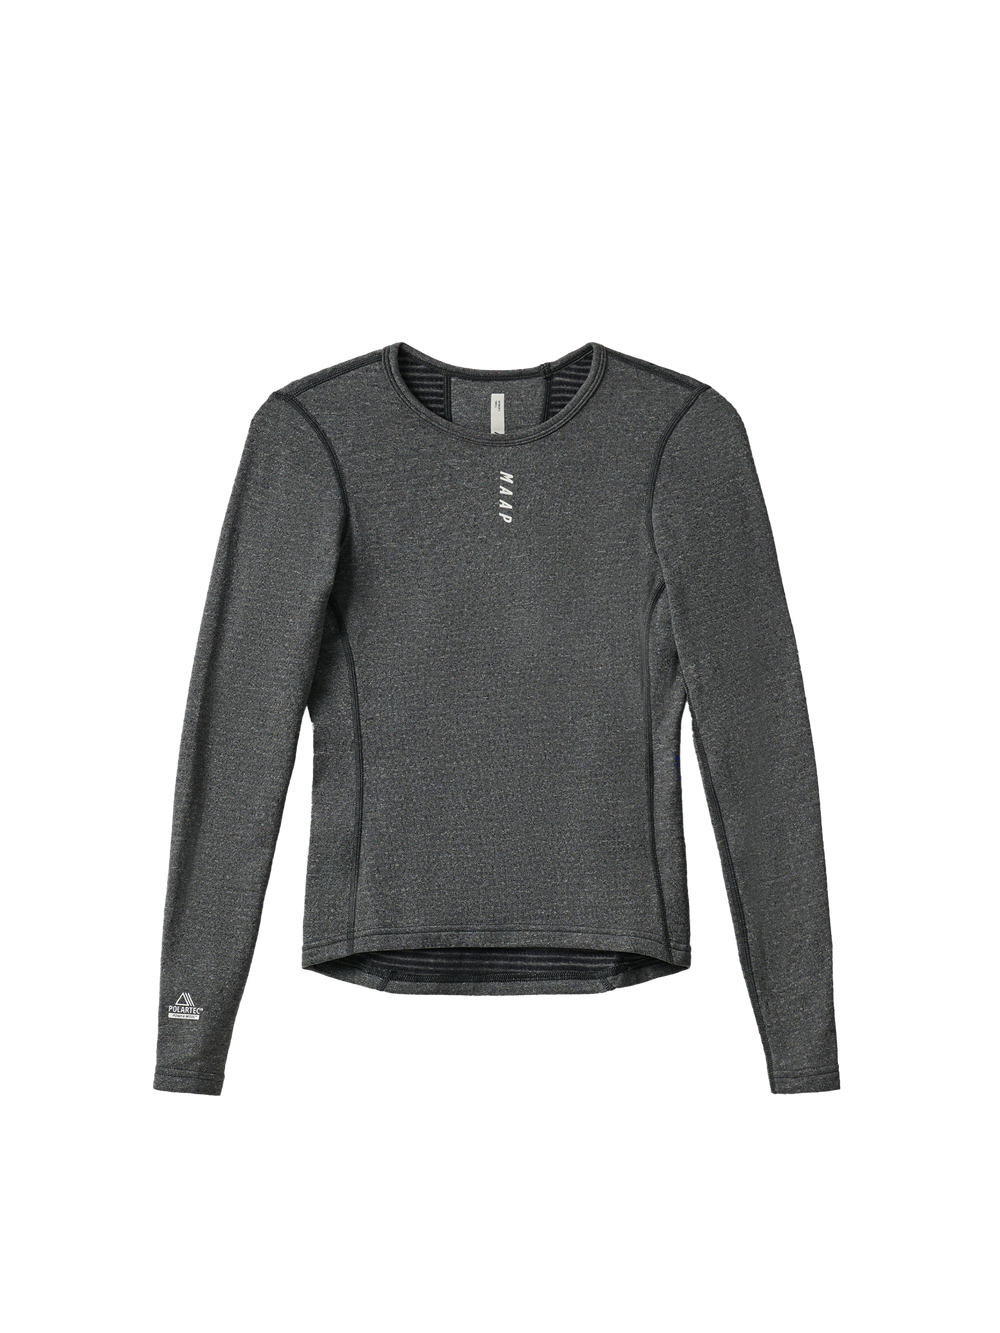 Product Image for Women's Deep Winter Base Layer